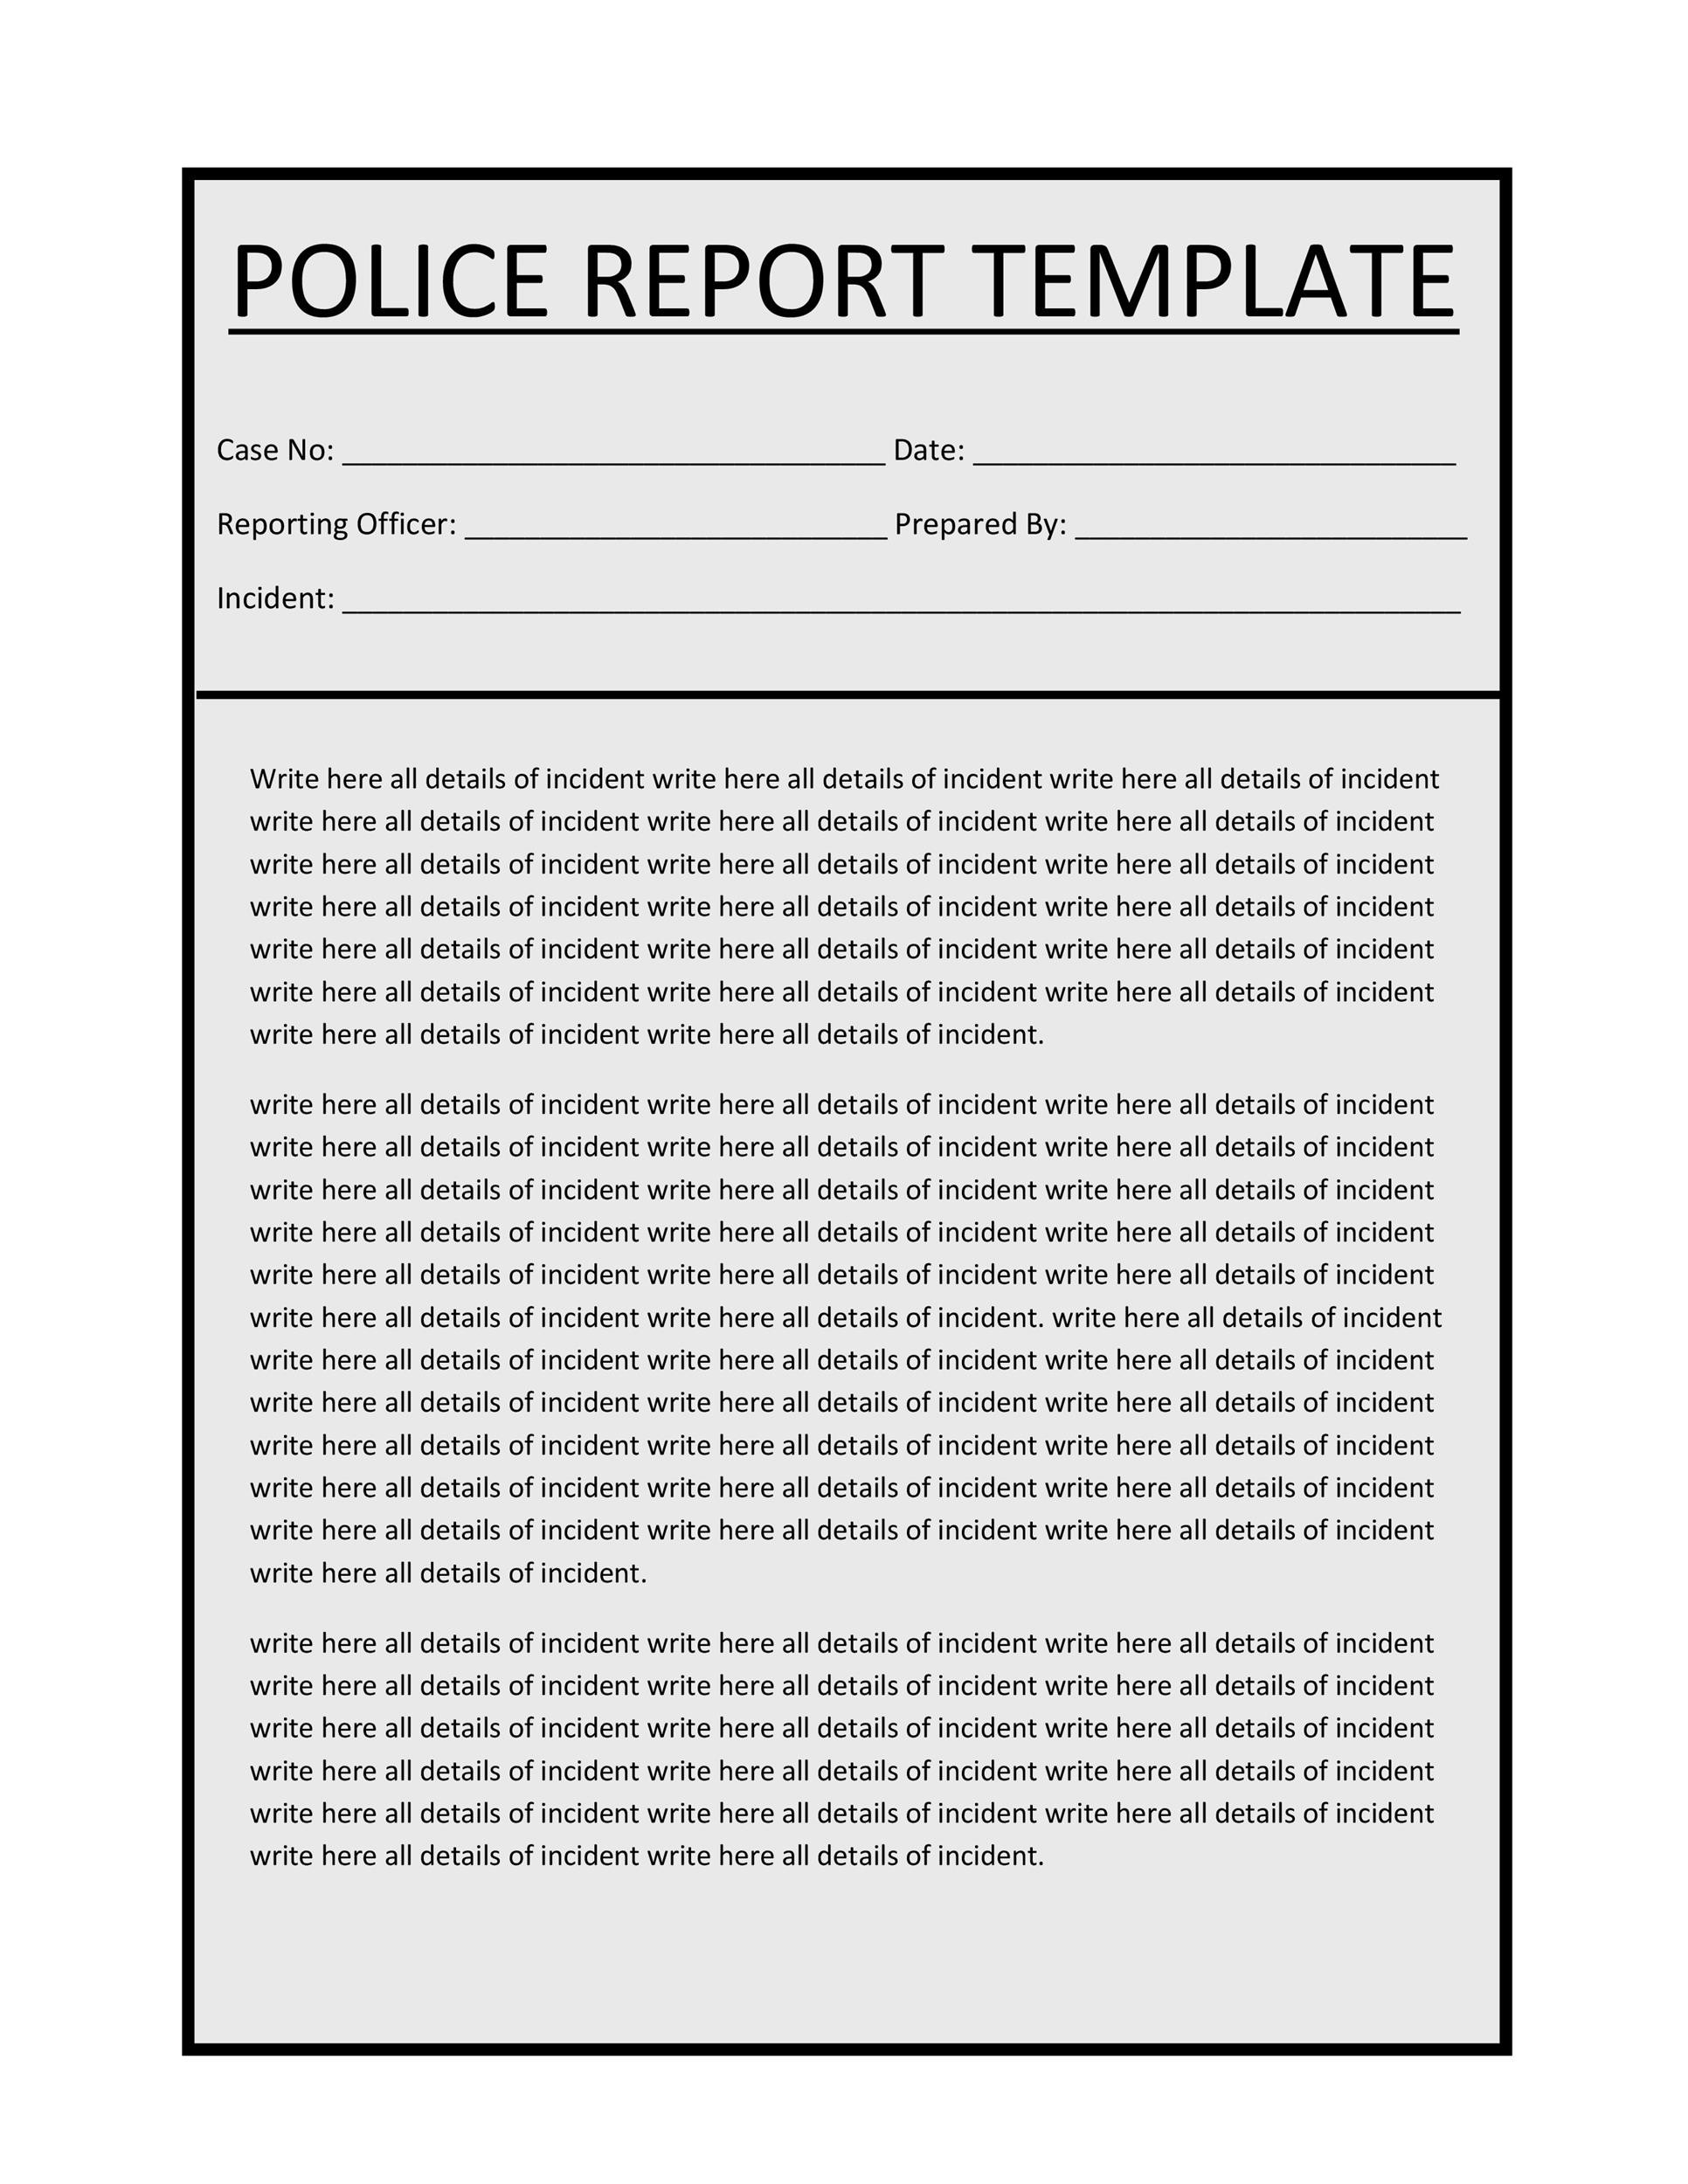 Free police report template 02